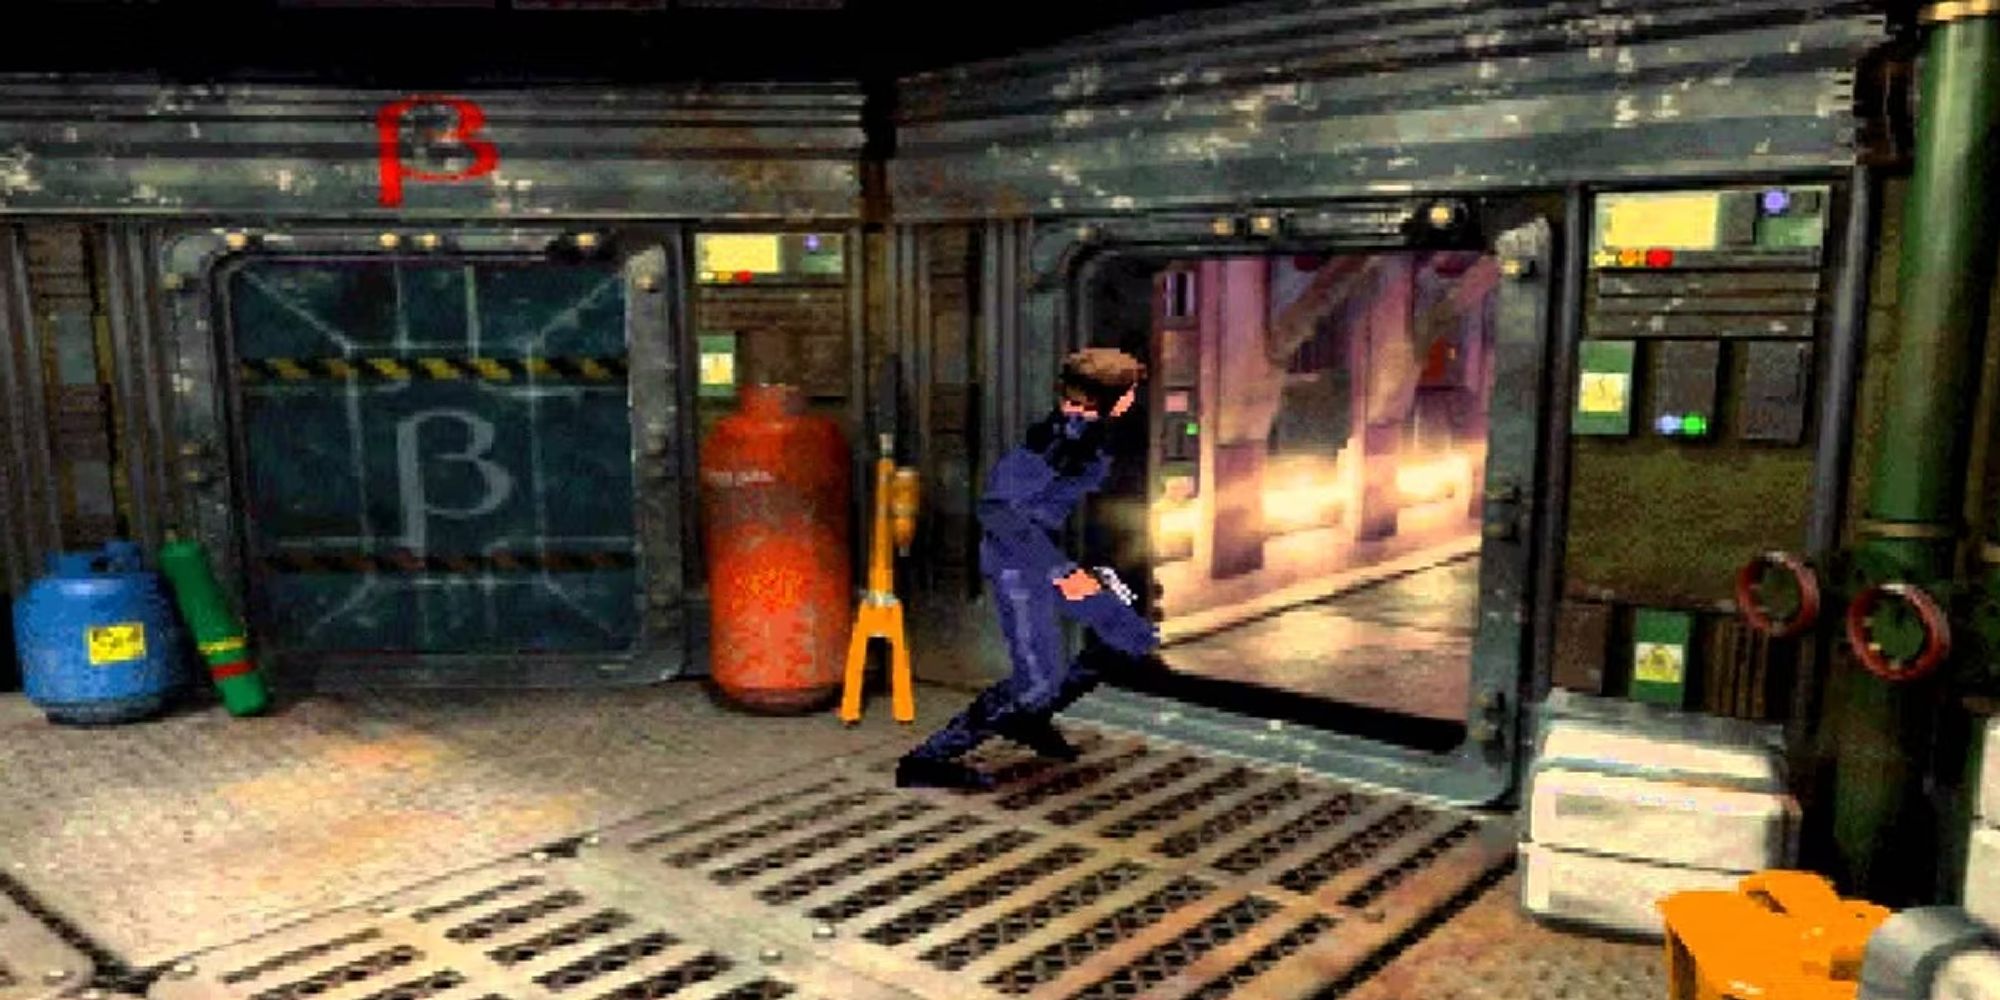 SIGNALIS Blends the Retro Action of Resident Evil with the Horror